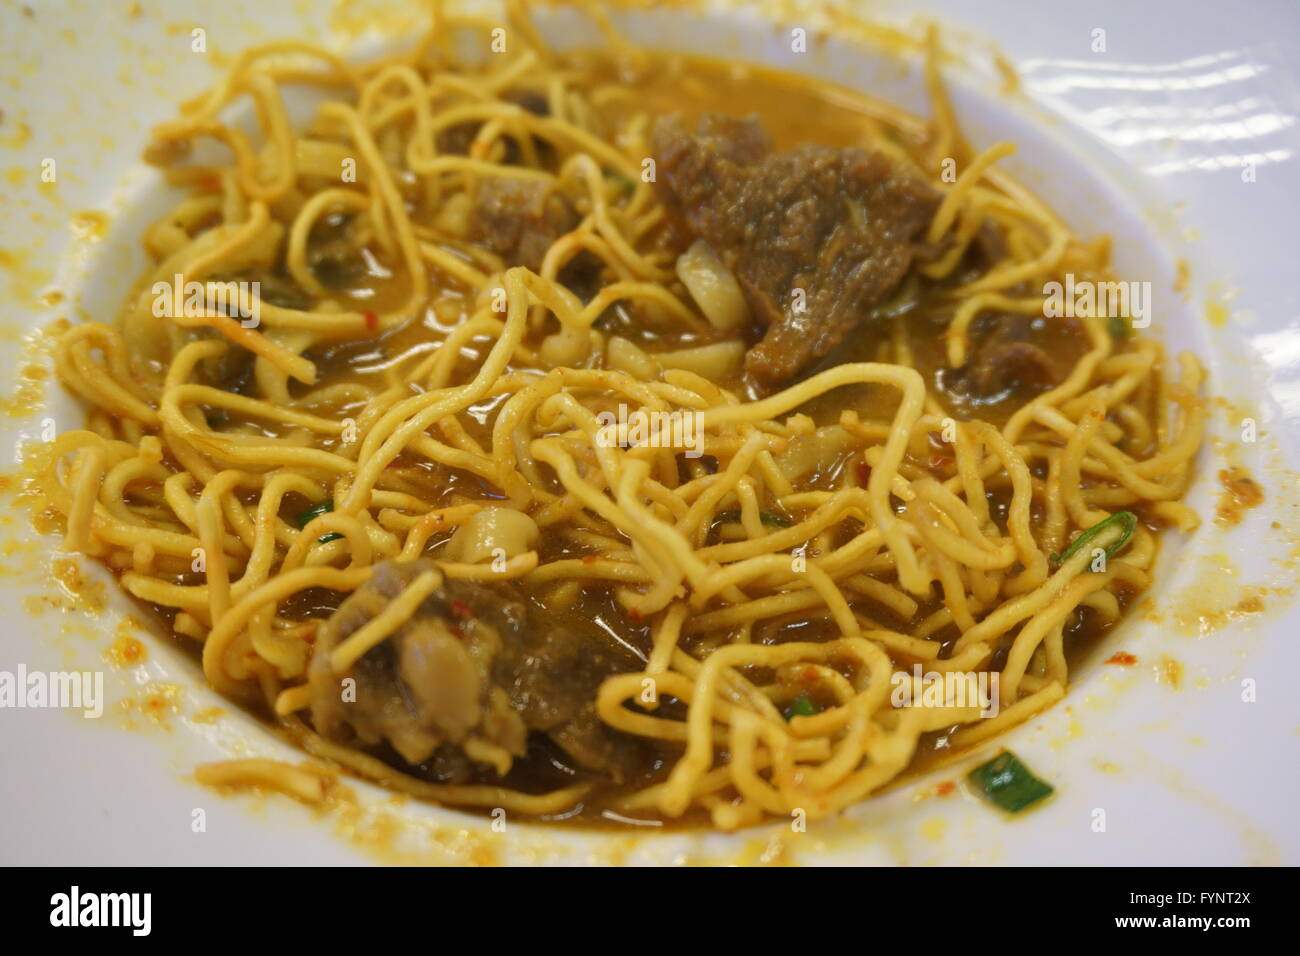 khao soi, famous noodle dish from Chiang Mai, Thailand Stock Photo